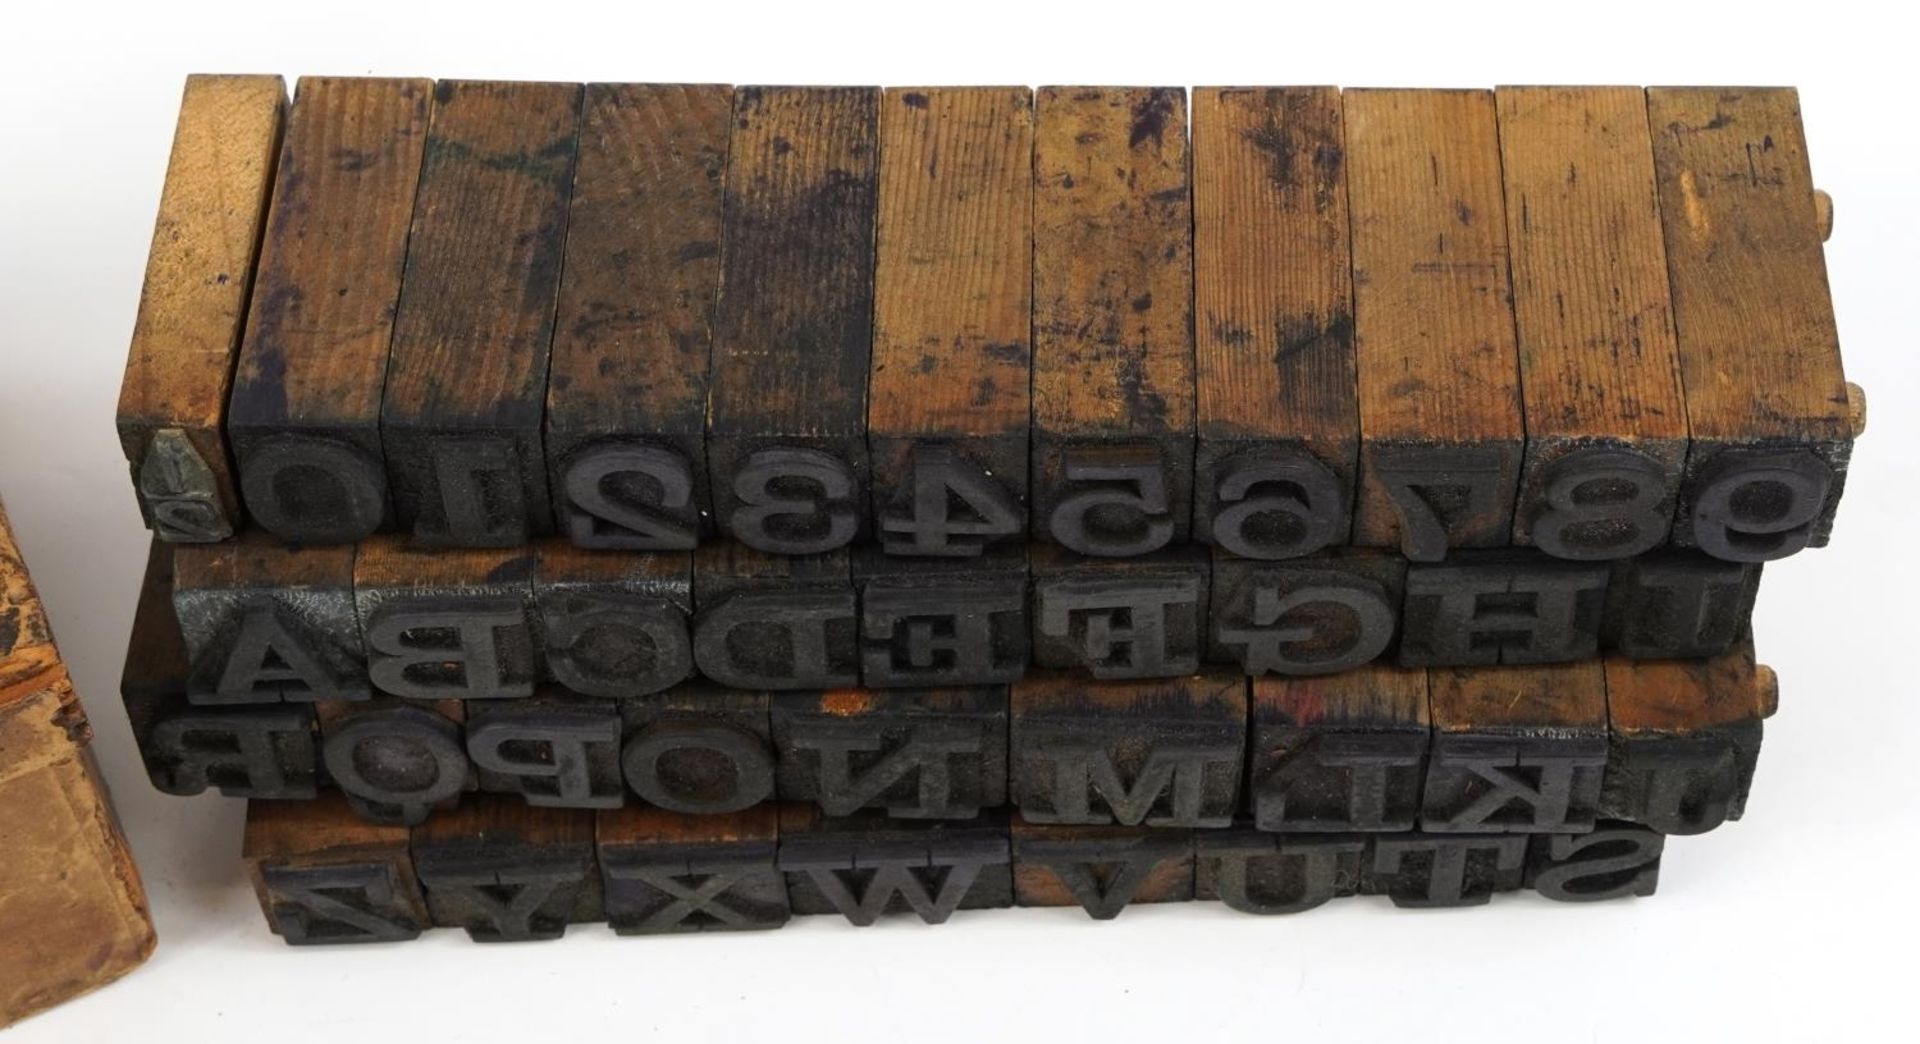 Set of vintage alphabet and numbers printer's blocks with fitted case : For further information on - Image 3 of 4